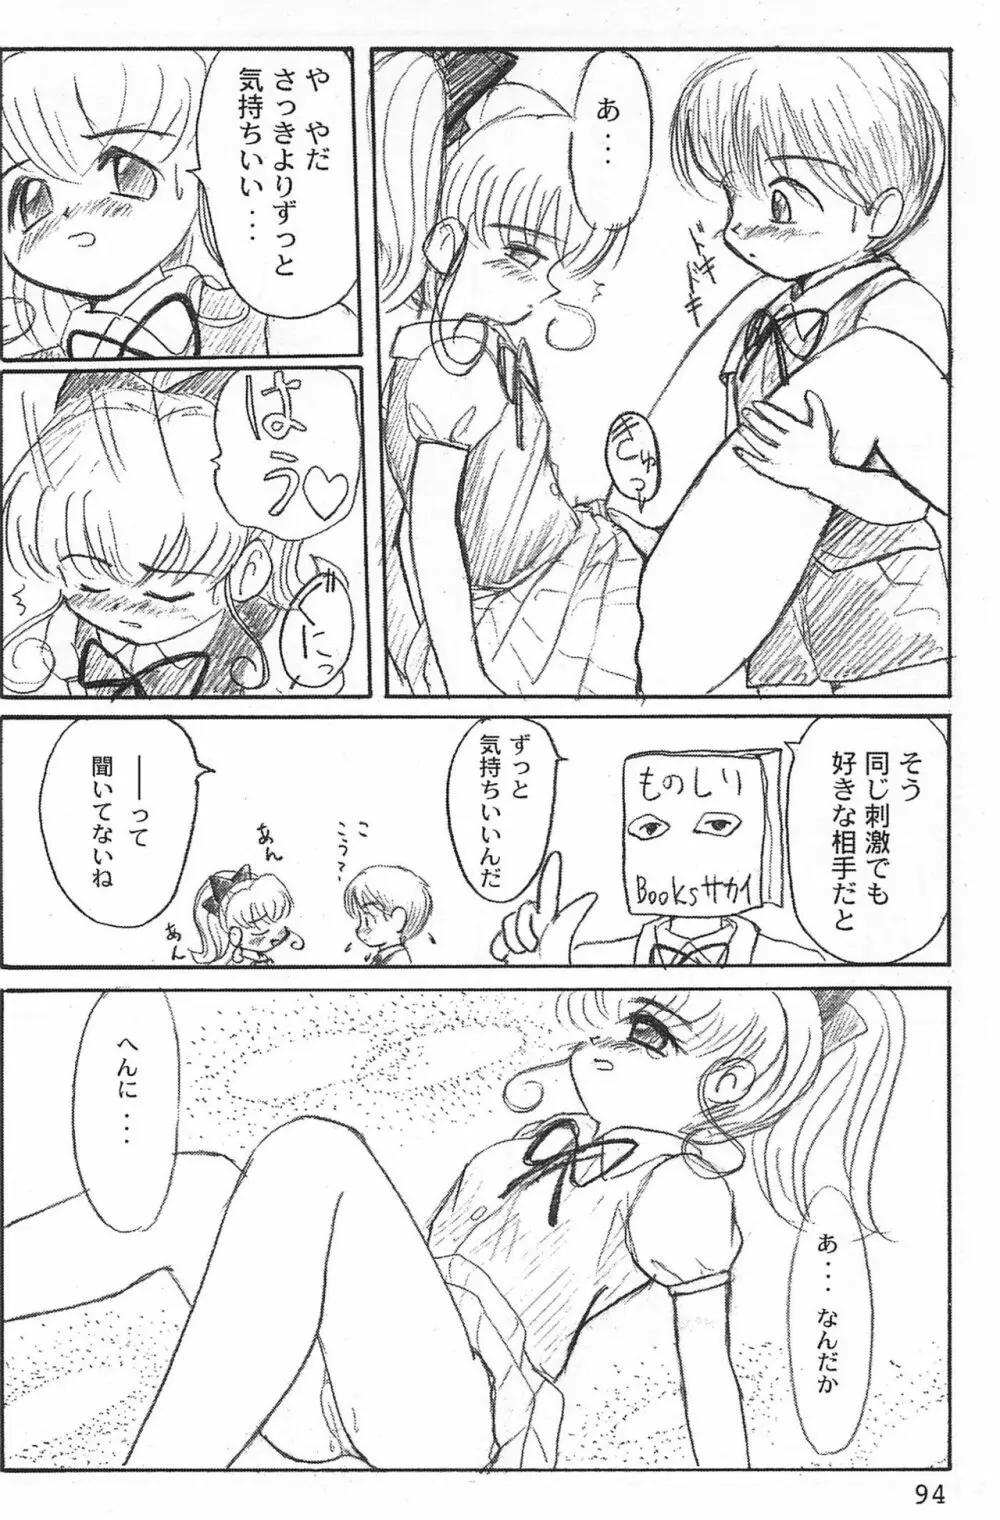 ND-special Volume 1 94ページ